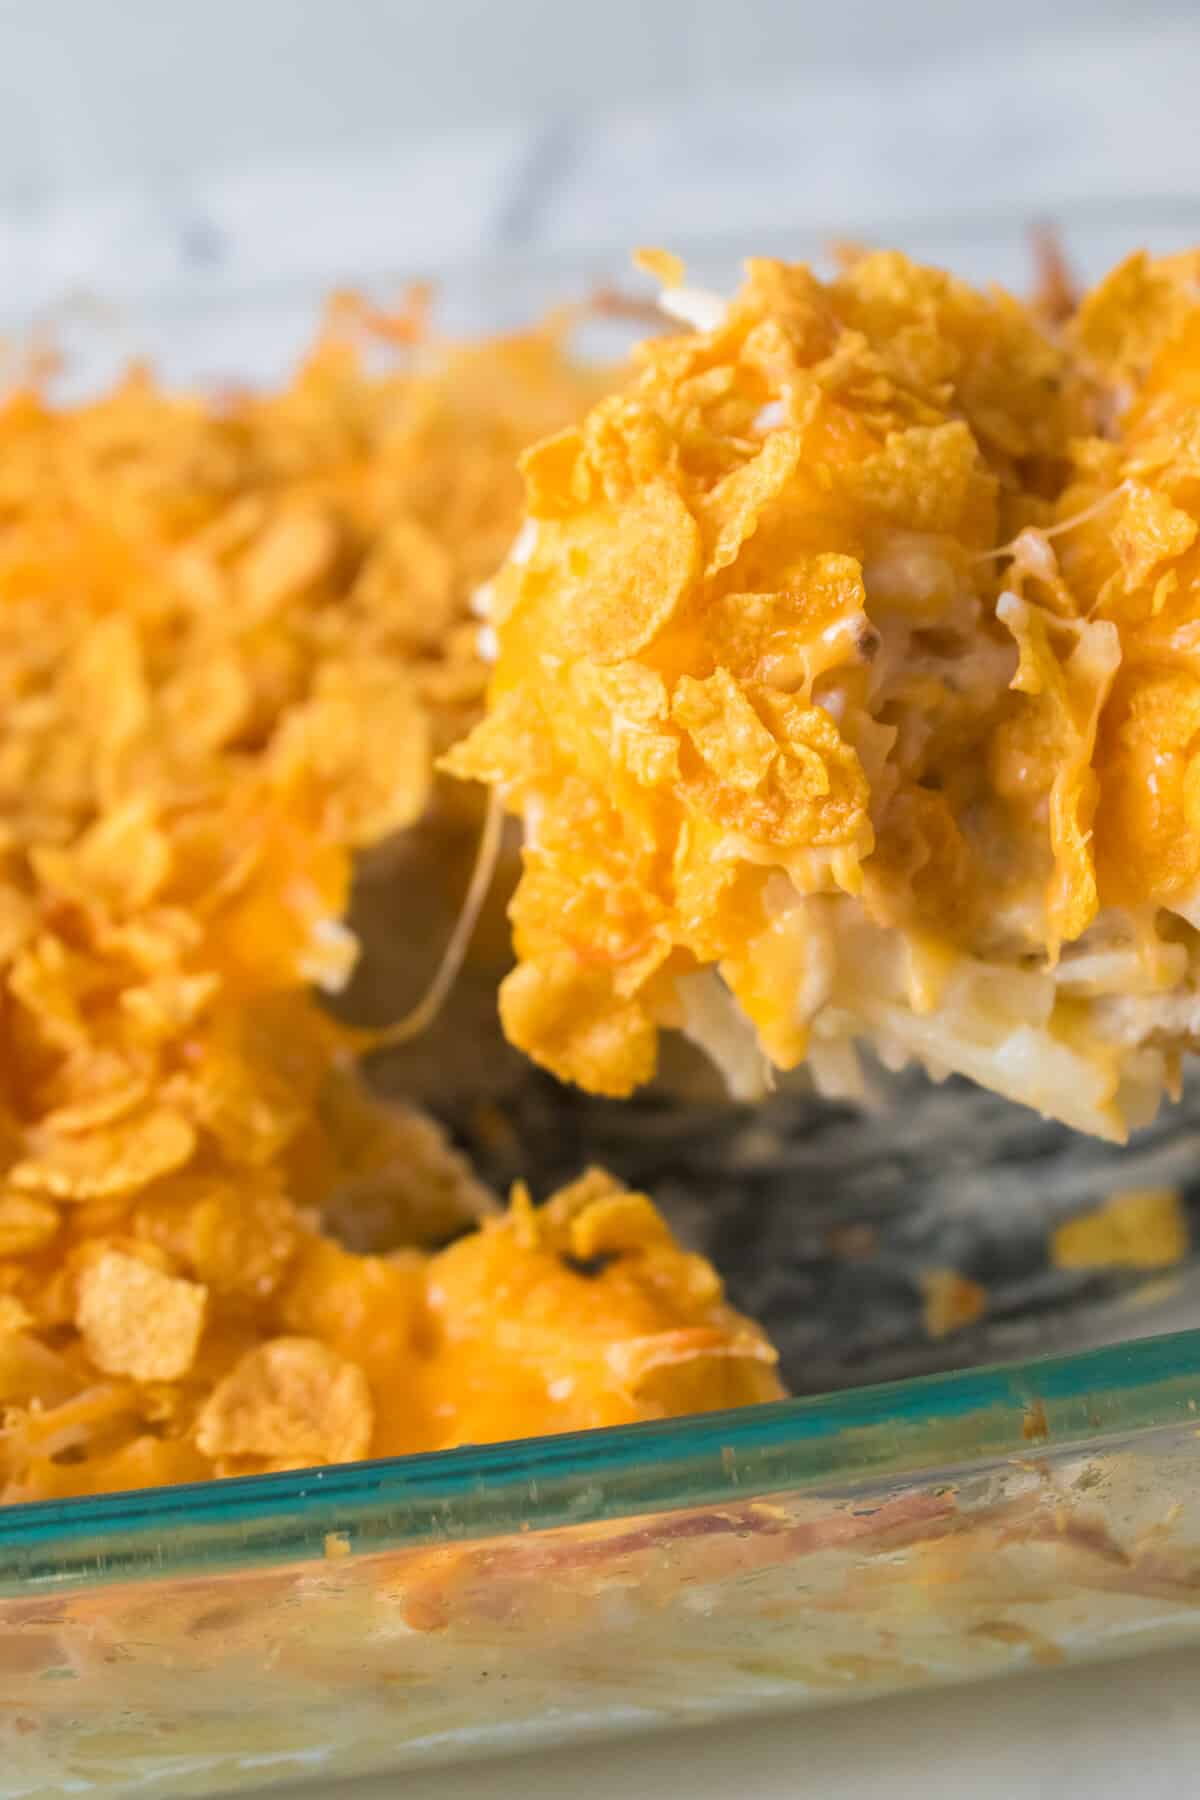 spoon scooping out funeral potatoes from glass casserole dish